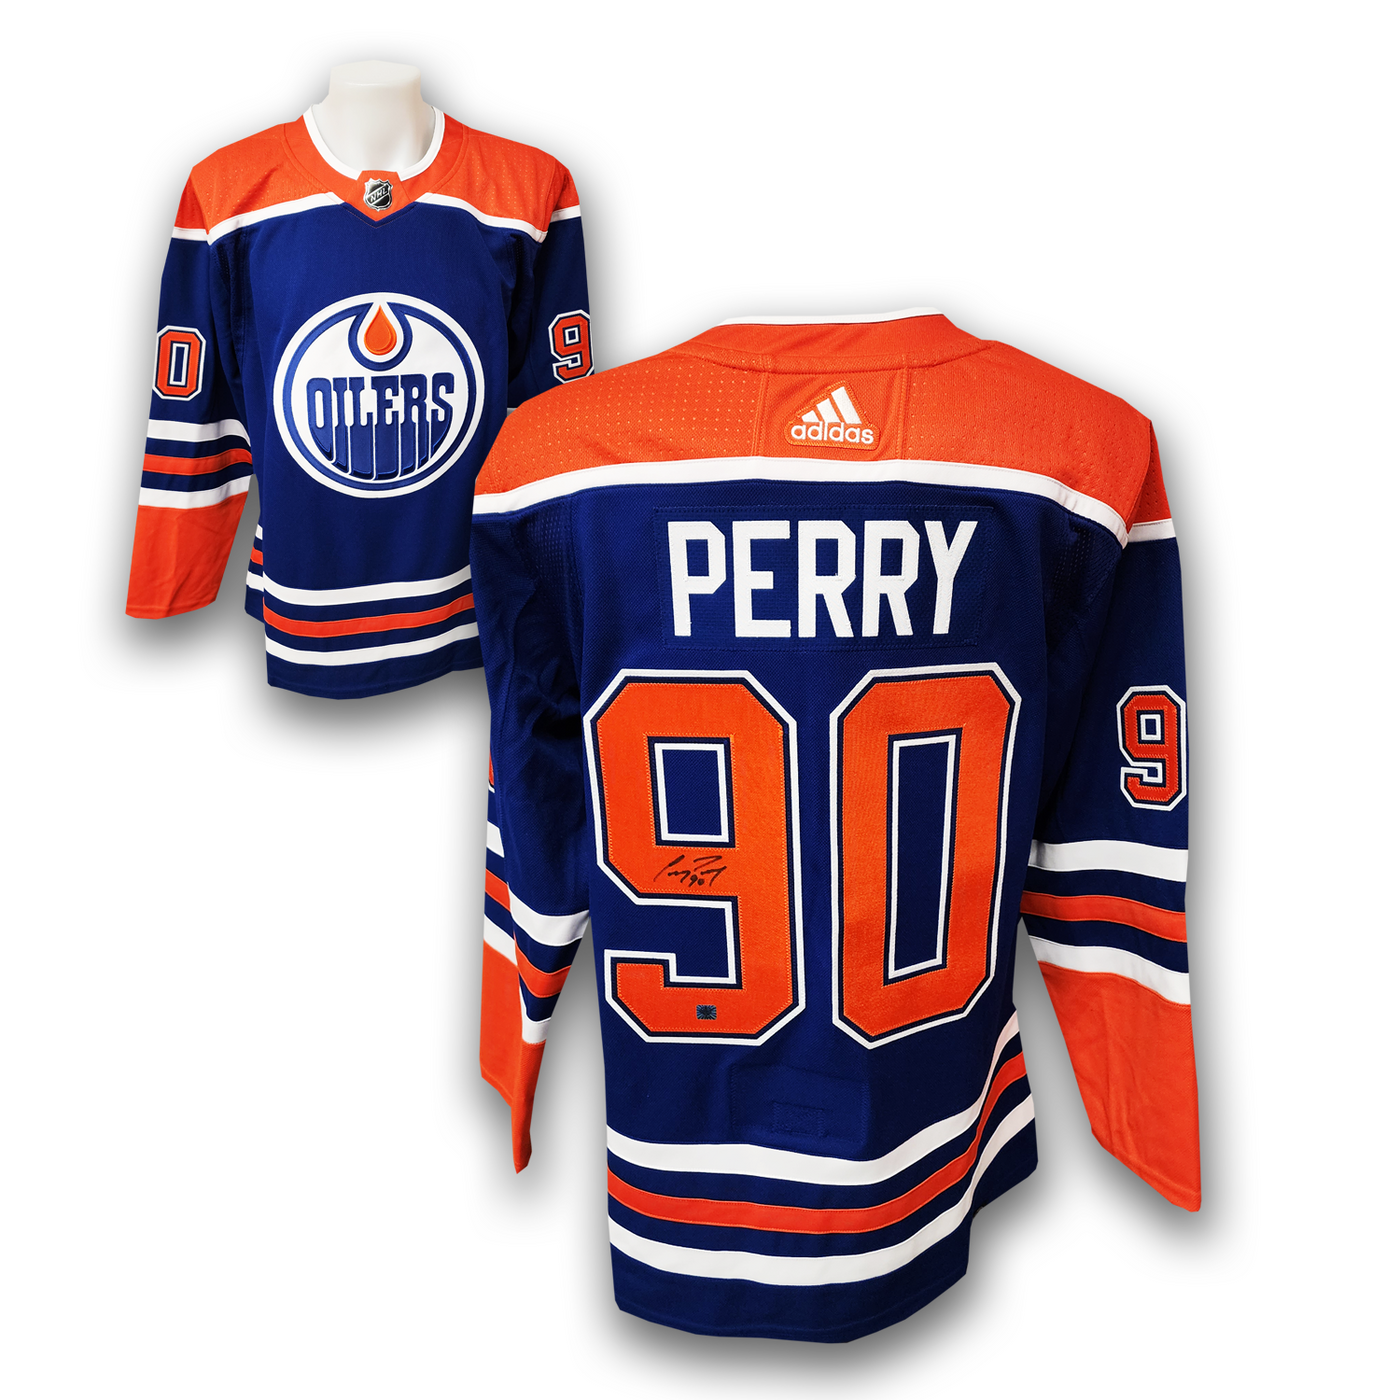 Corey Perry Autographed Edmonton Oilers Home Adidas Jersey